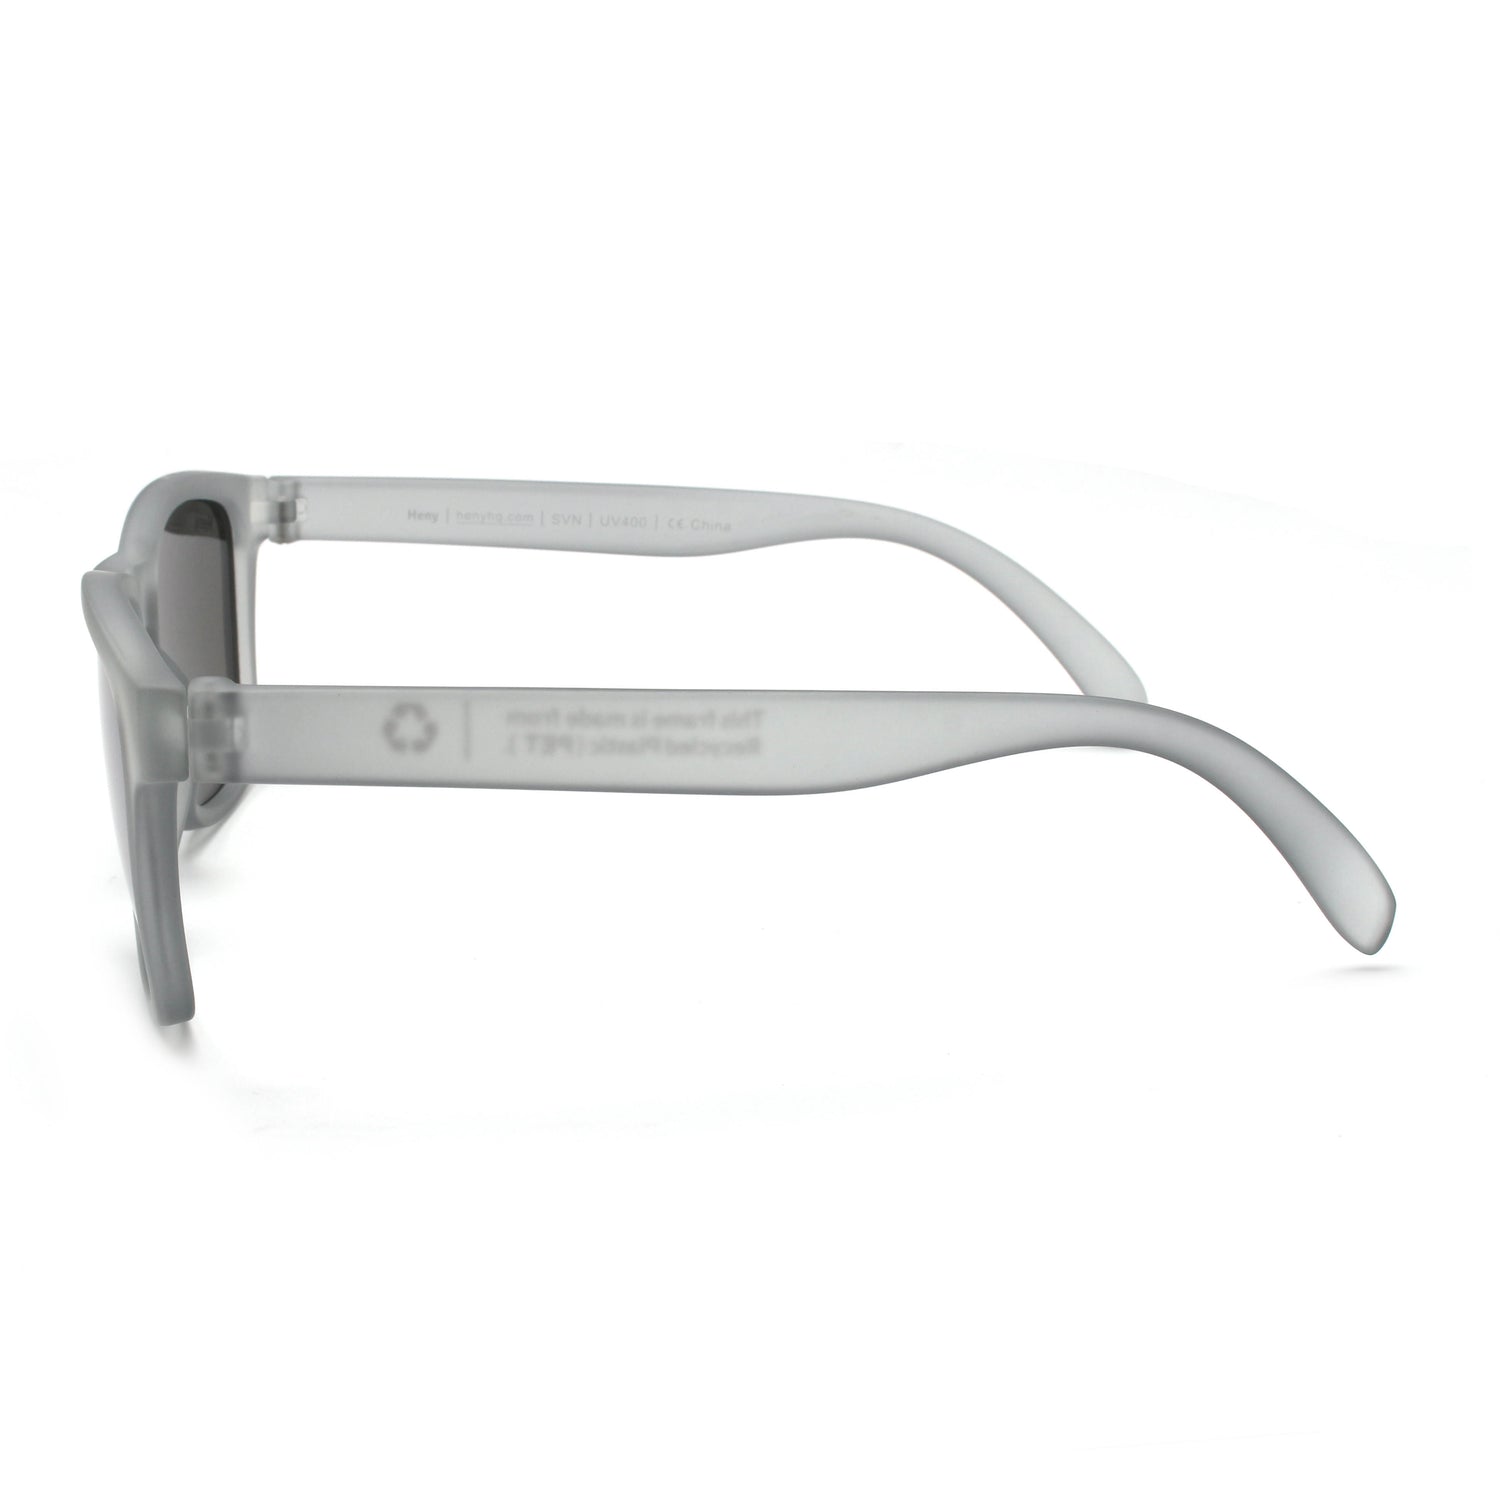 Side view of the Silver Surfer Polarized Original Heny Sunglasses